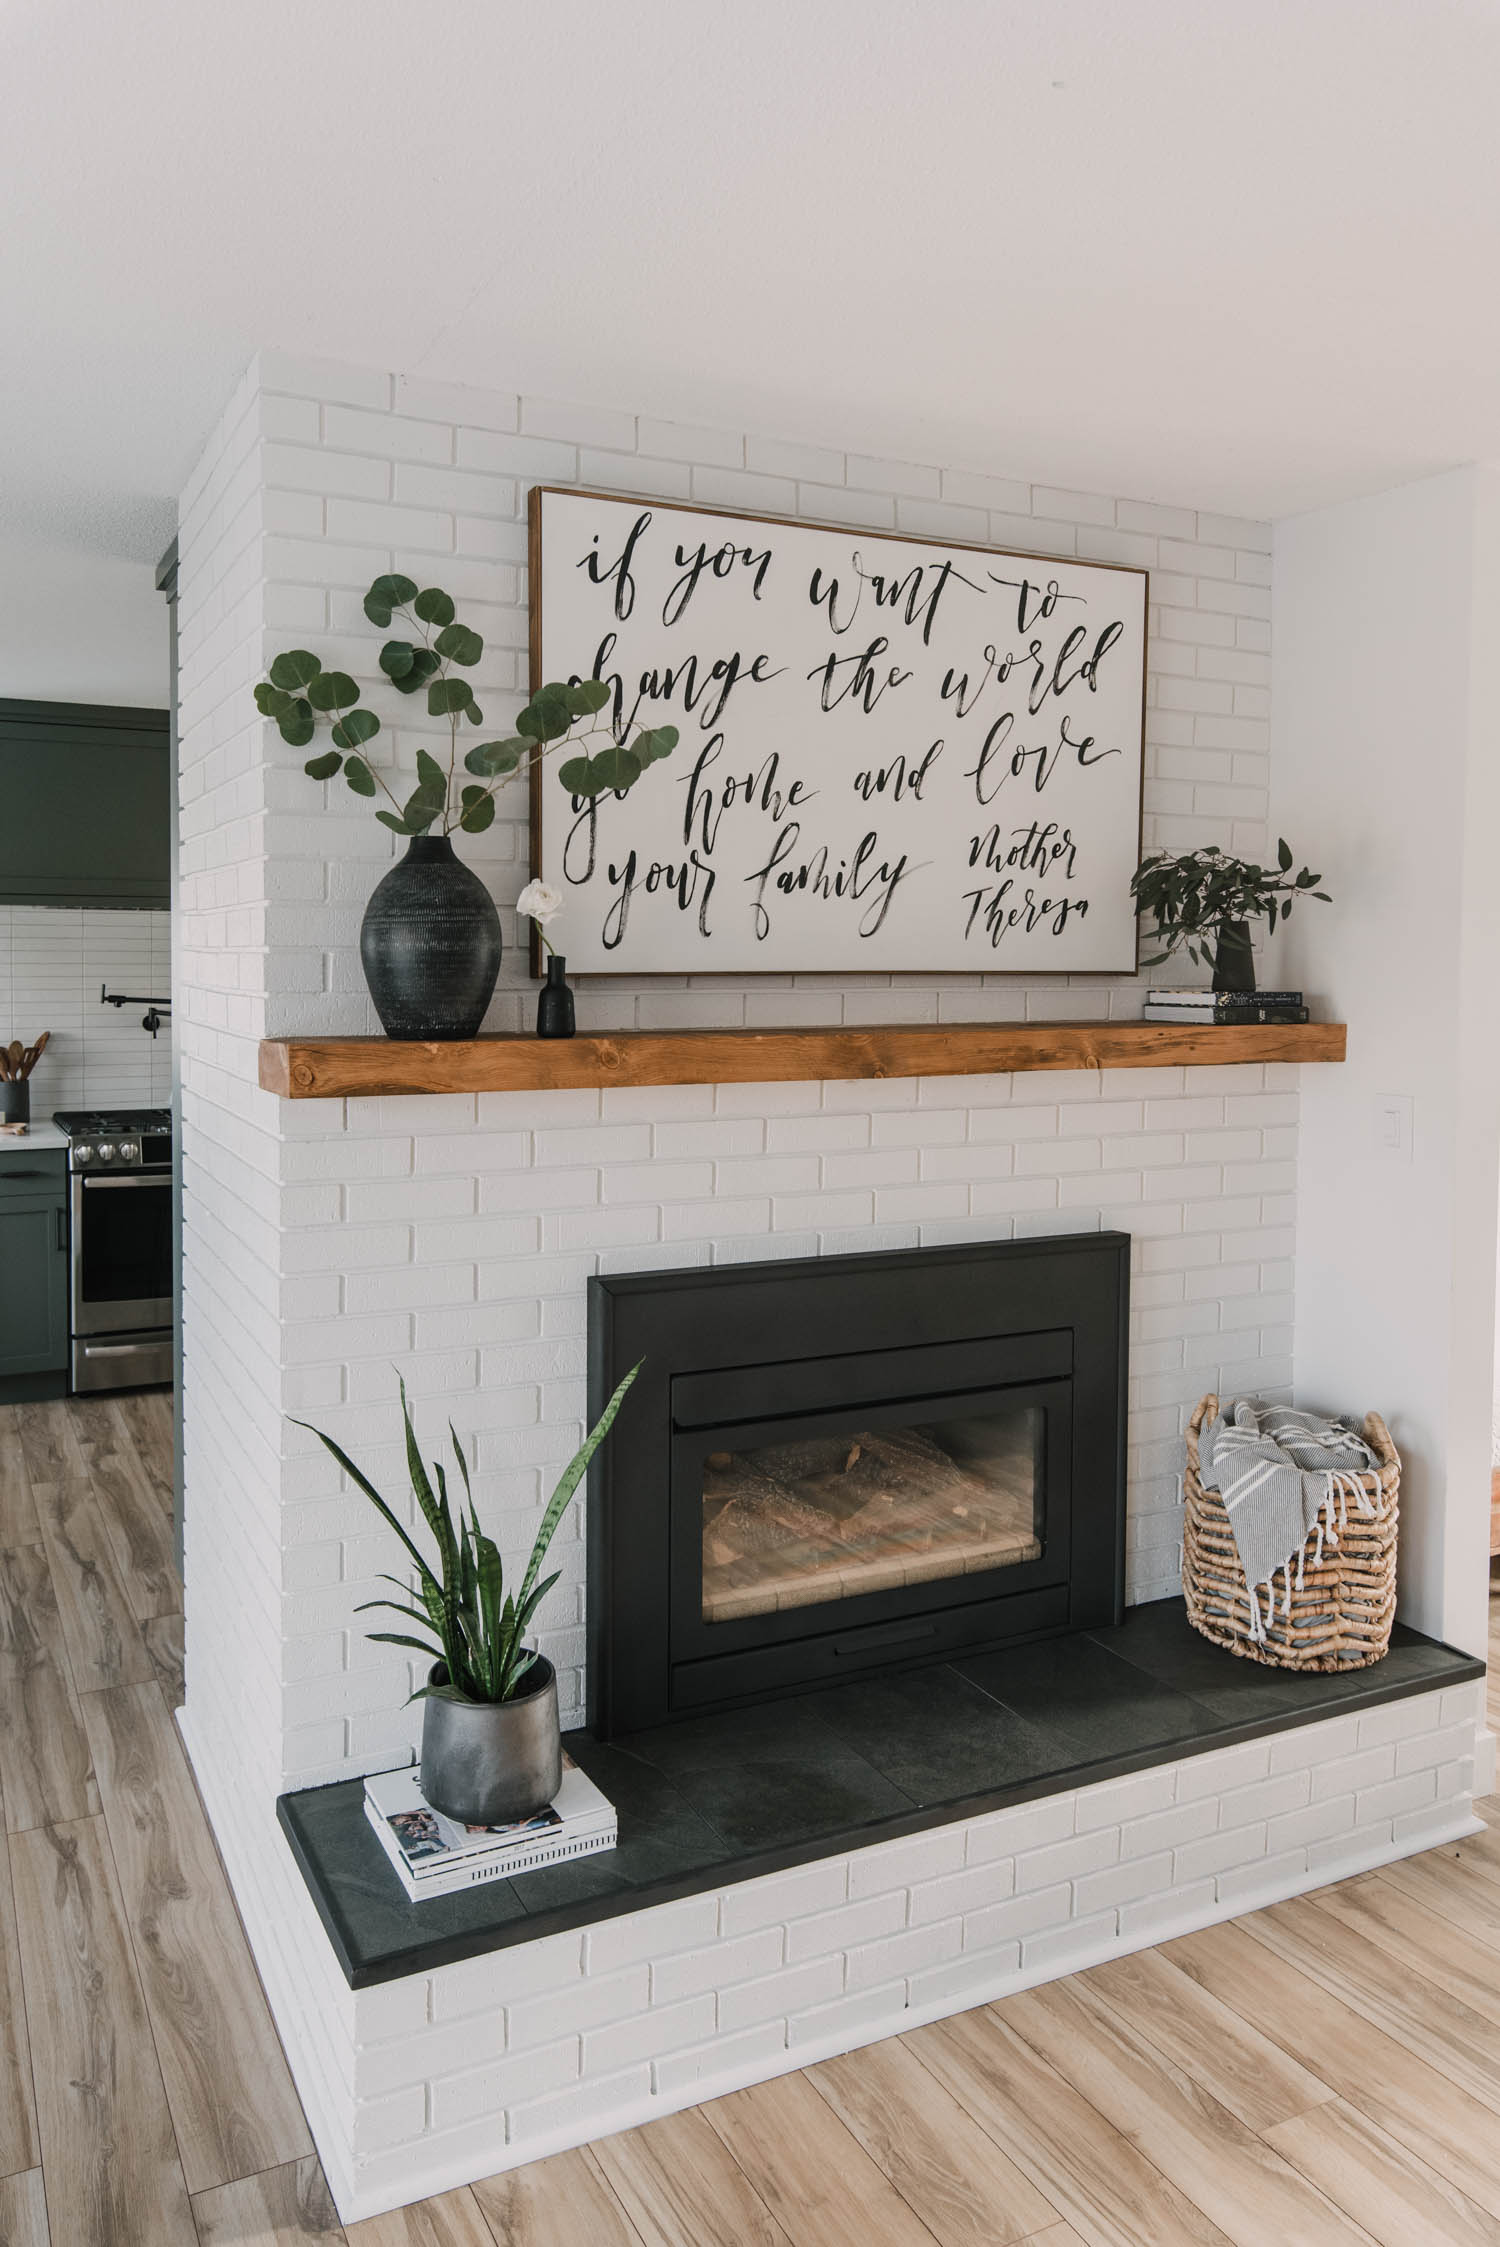 Diy Brick Fireplace Makeover Lemon, How To Clean The Brick Around My Fireplace